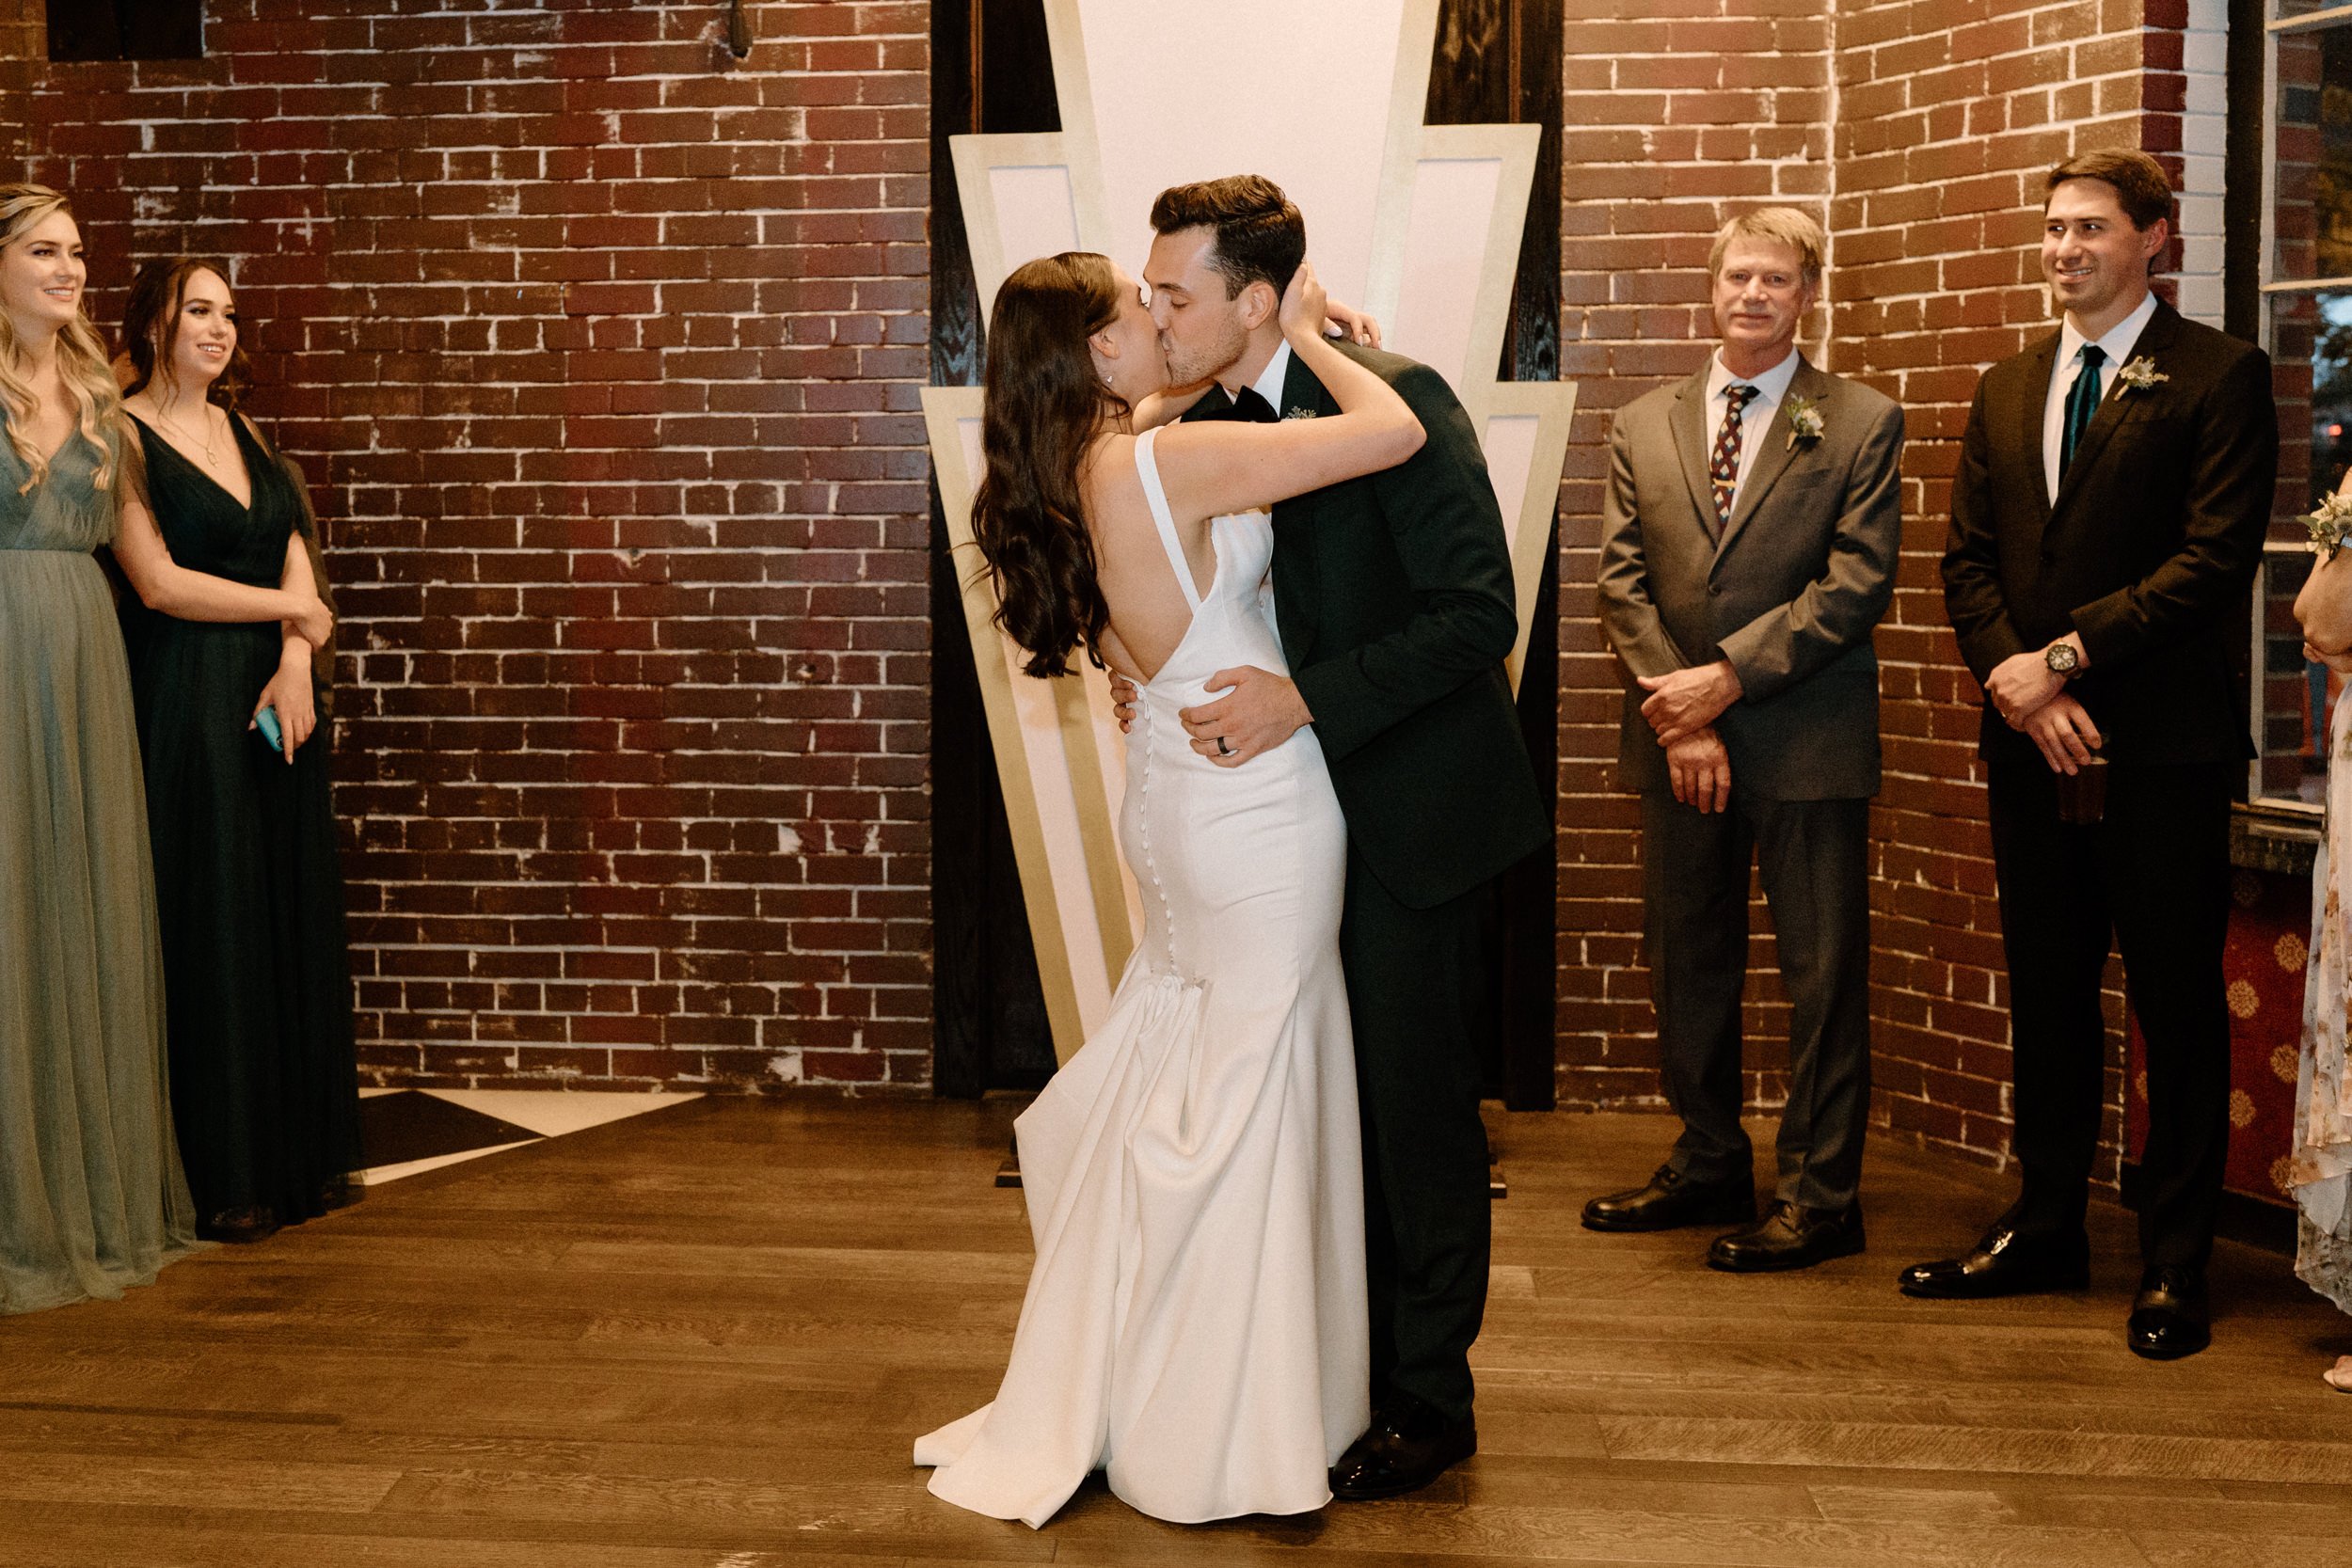 The bride and groom kiss during their first dance